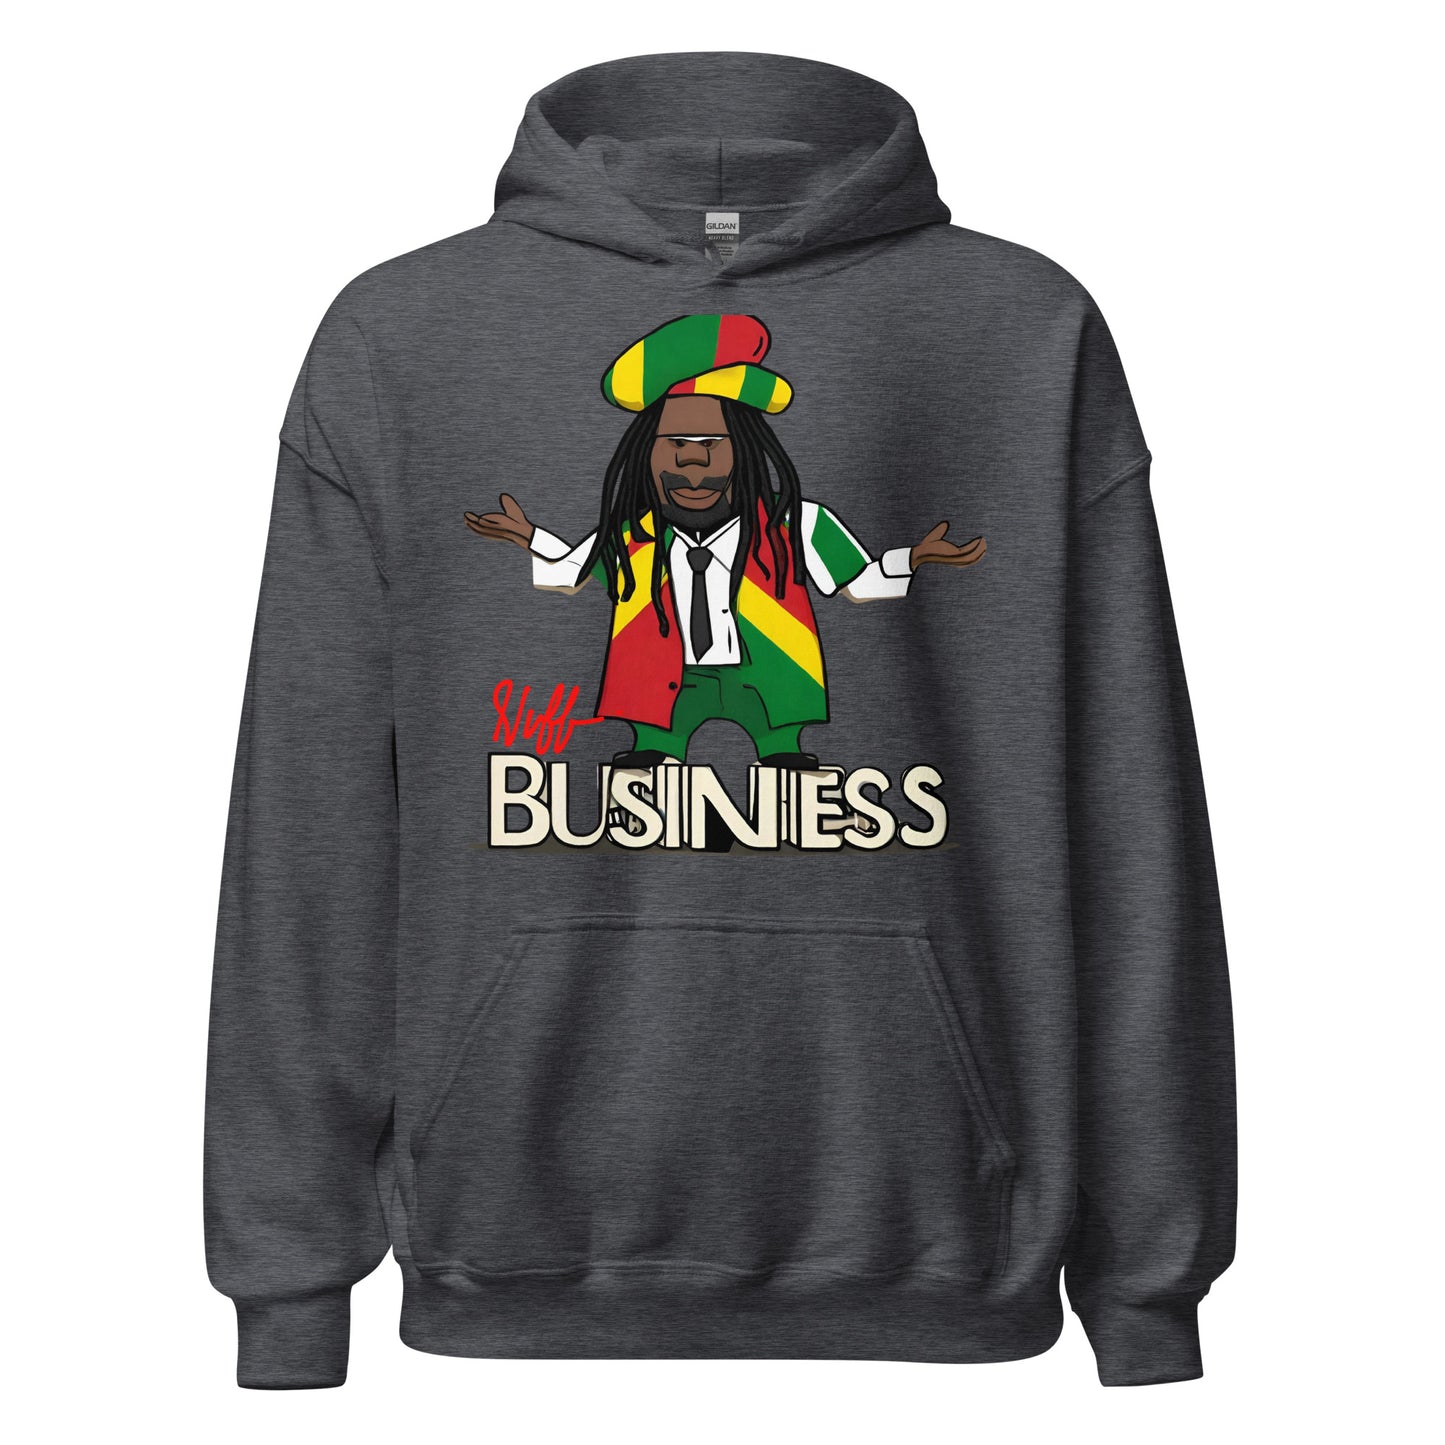 Stand on NUFF Business - Men's Hoodie (RN)